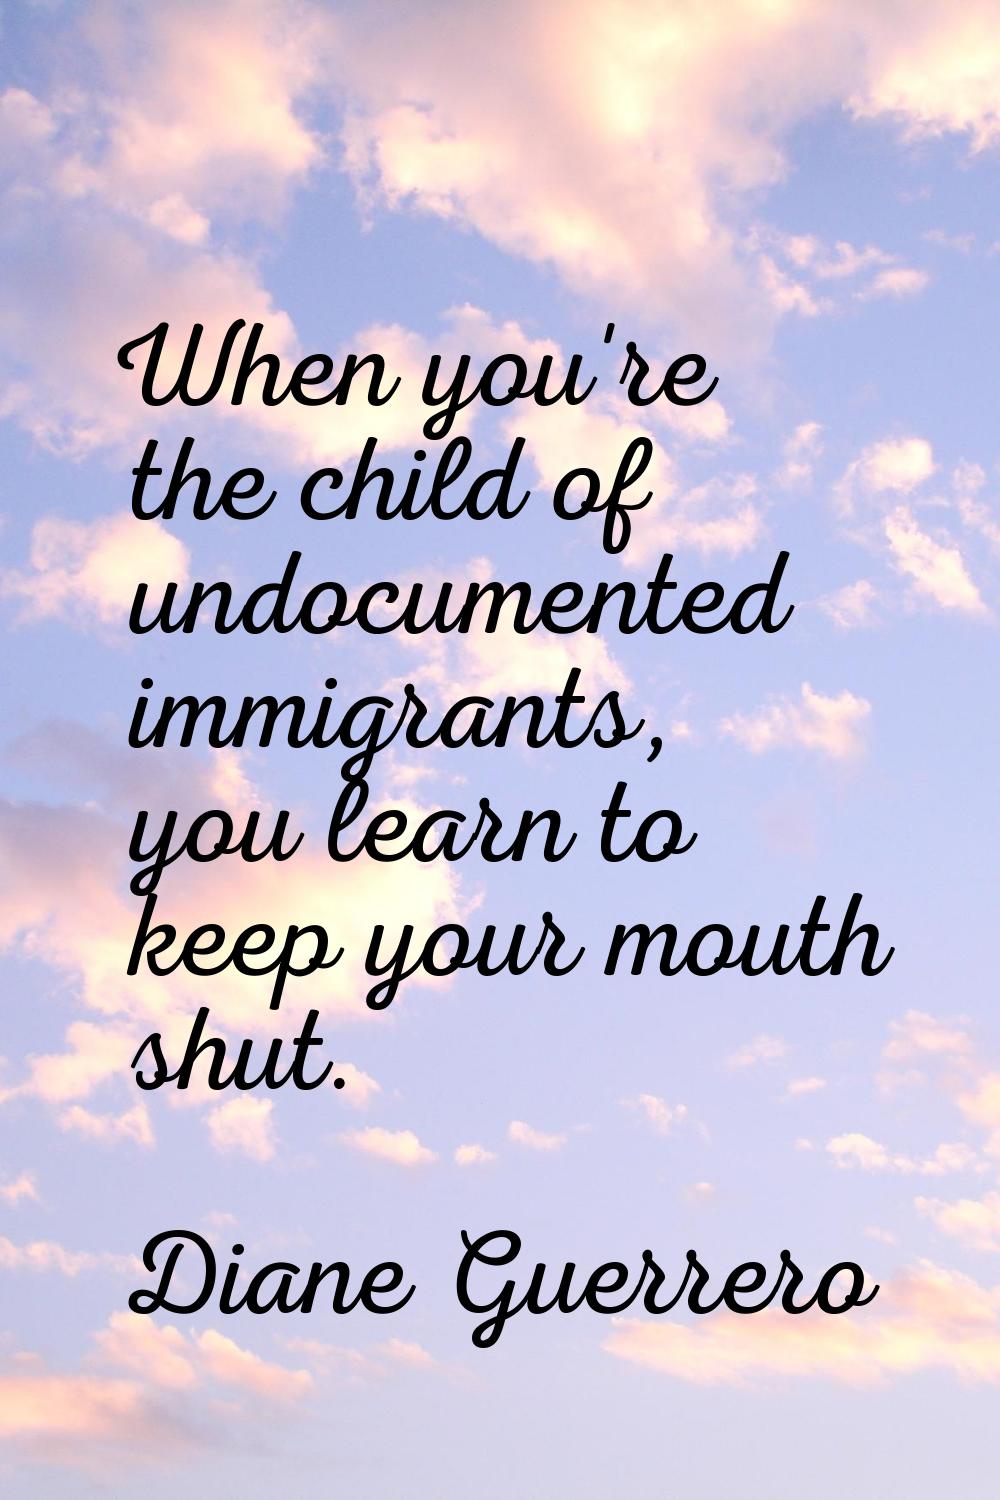 When you're the child of undocumented immigrants, you learn to keep your mouth shut.